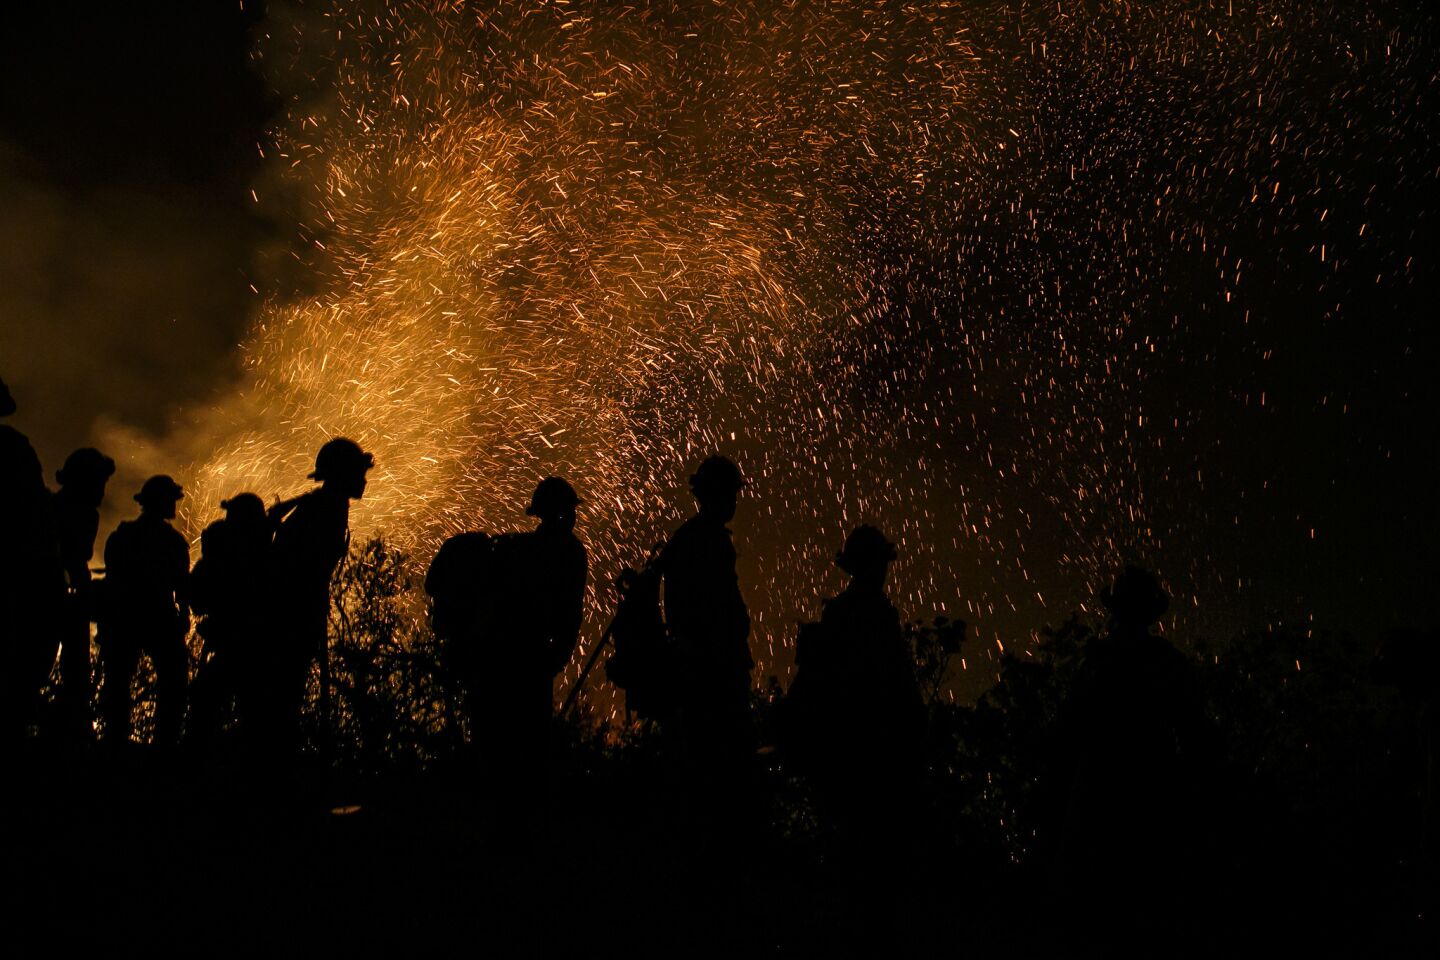 Firefighter monitors the embers in the air as they conduct a burn-out operation in El Capitan Canyon in Goleta.